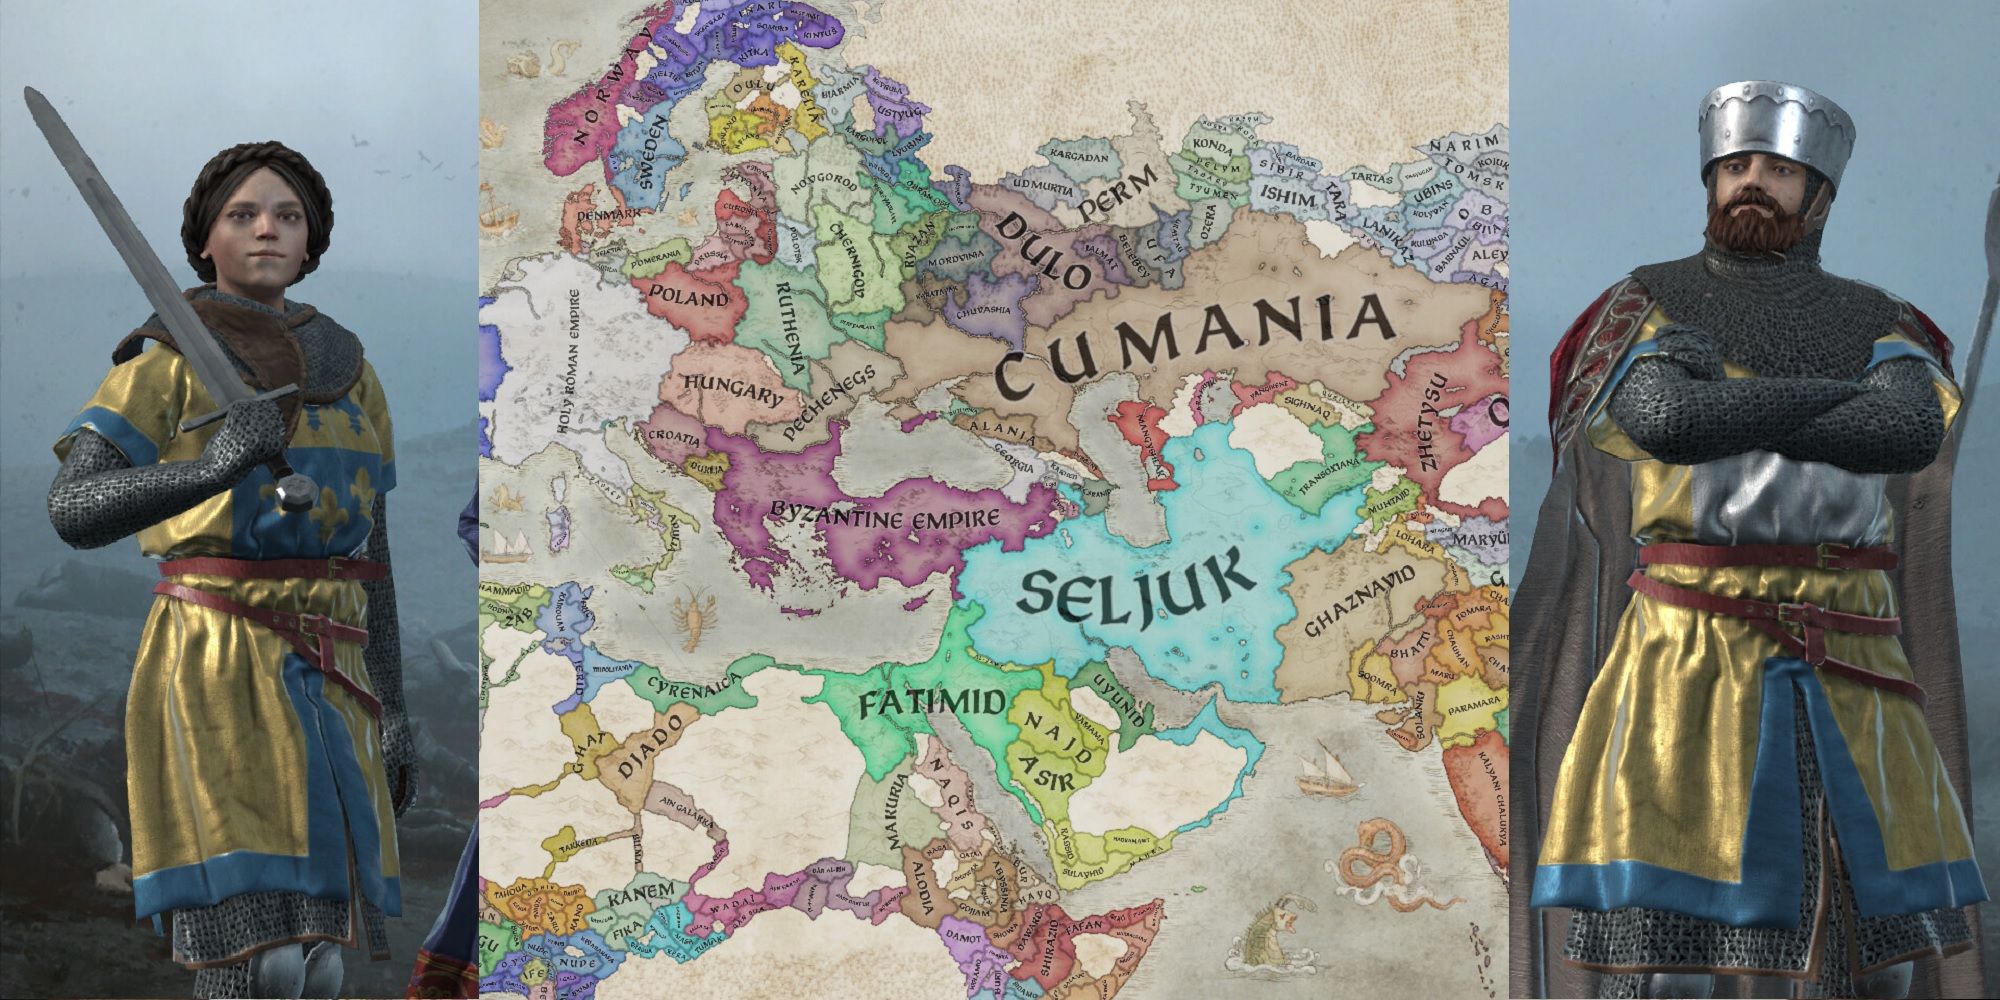 Two characters in Crusader Kings 3 superimposed over a map